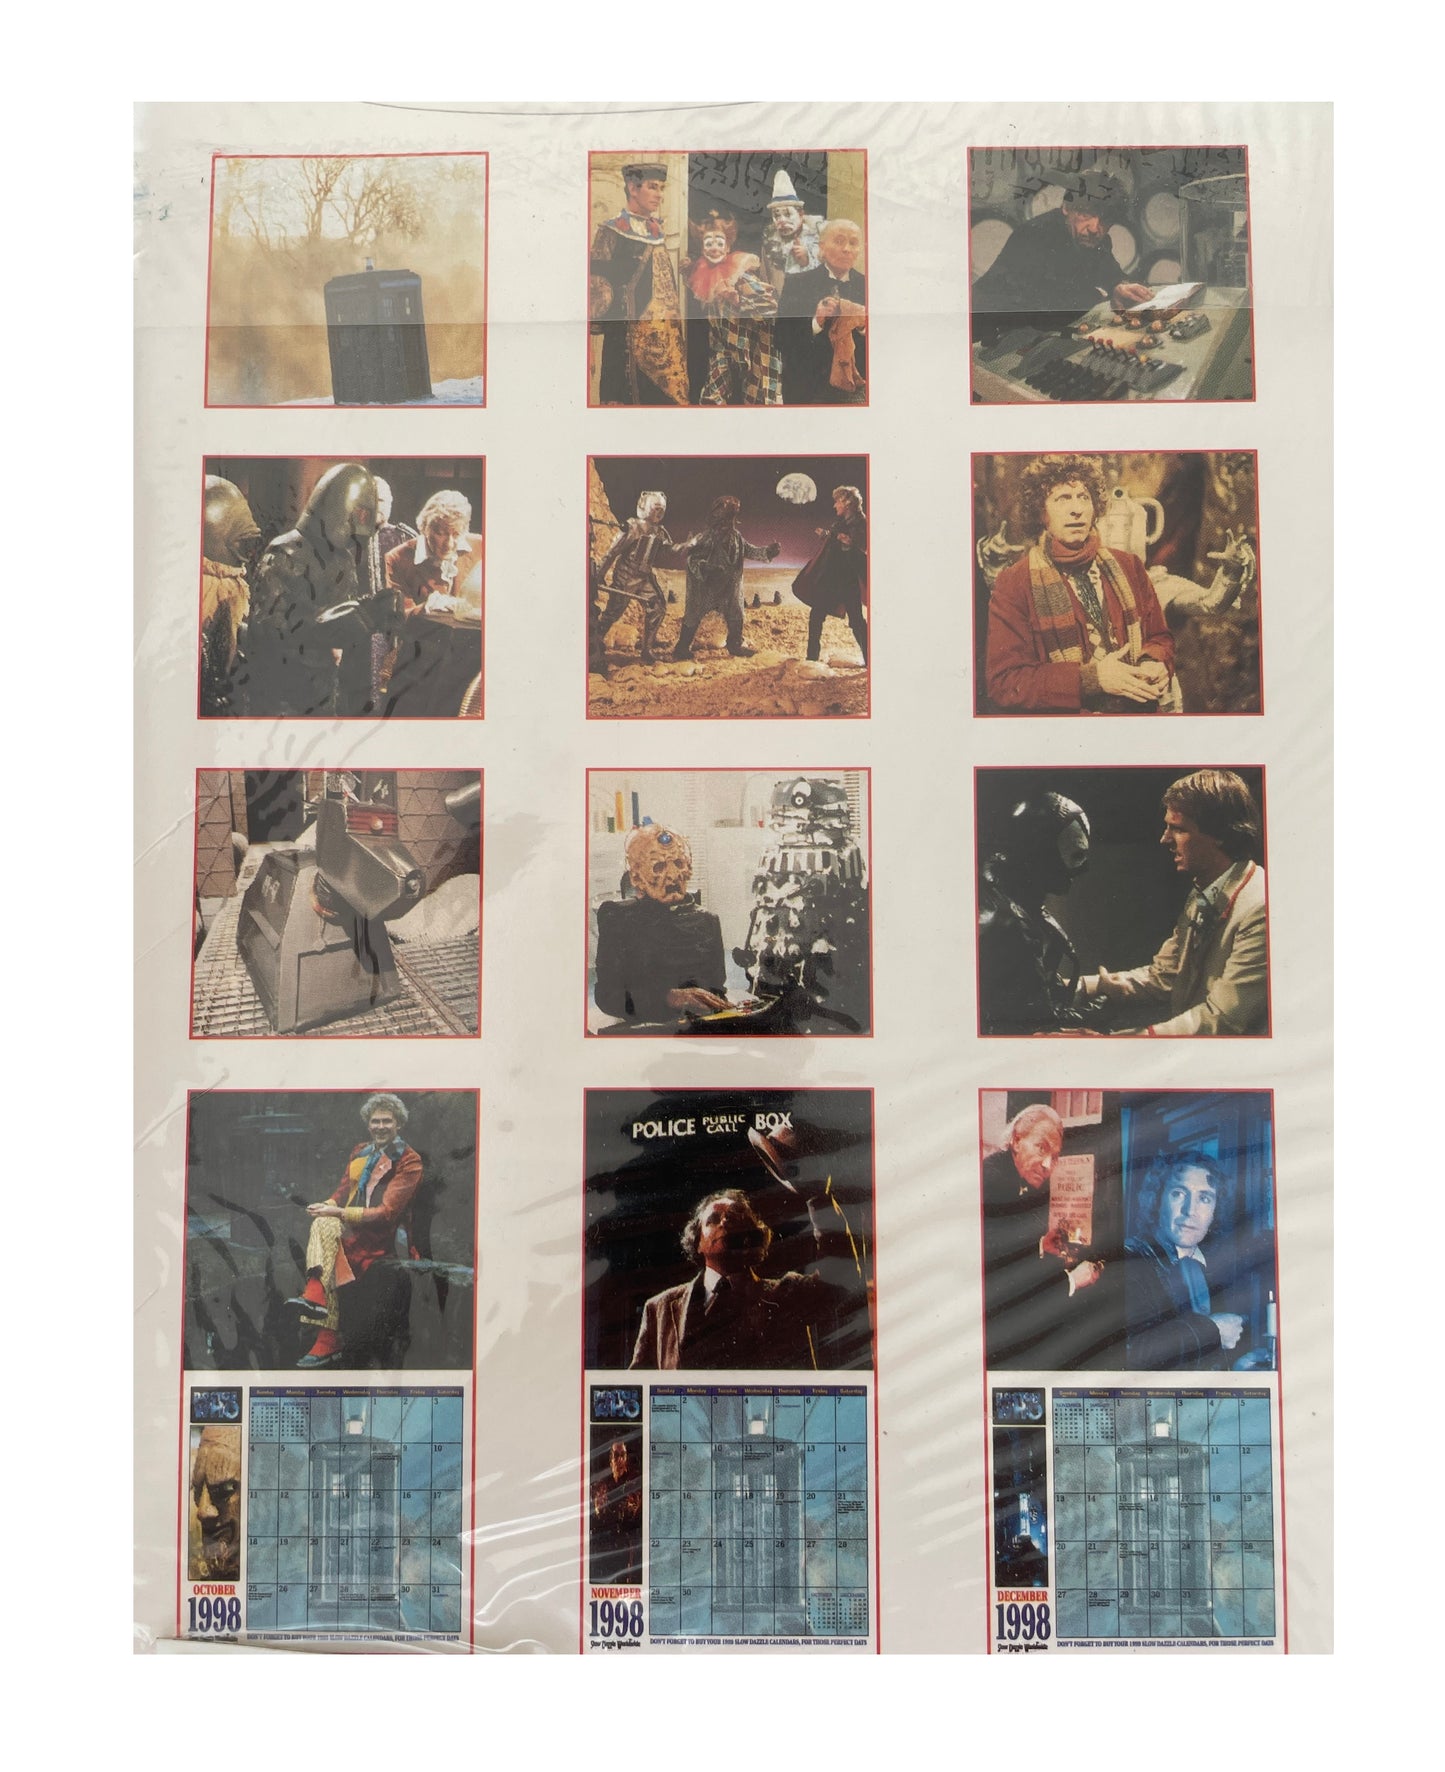 Vintage Doctor Who 35th Anniversary Special Edition Official Calendar 1998 Includes A Limited Edition Full Colour Stand-Up - Brand New Shop Stock Room Find